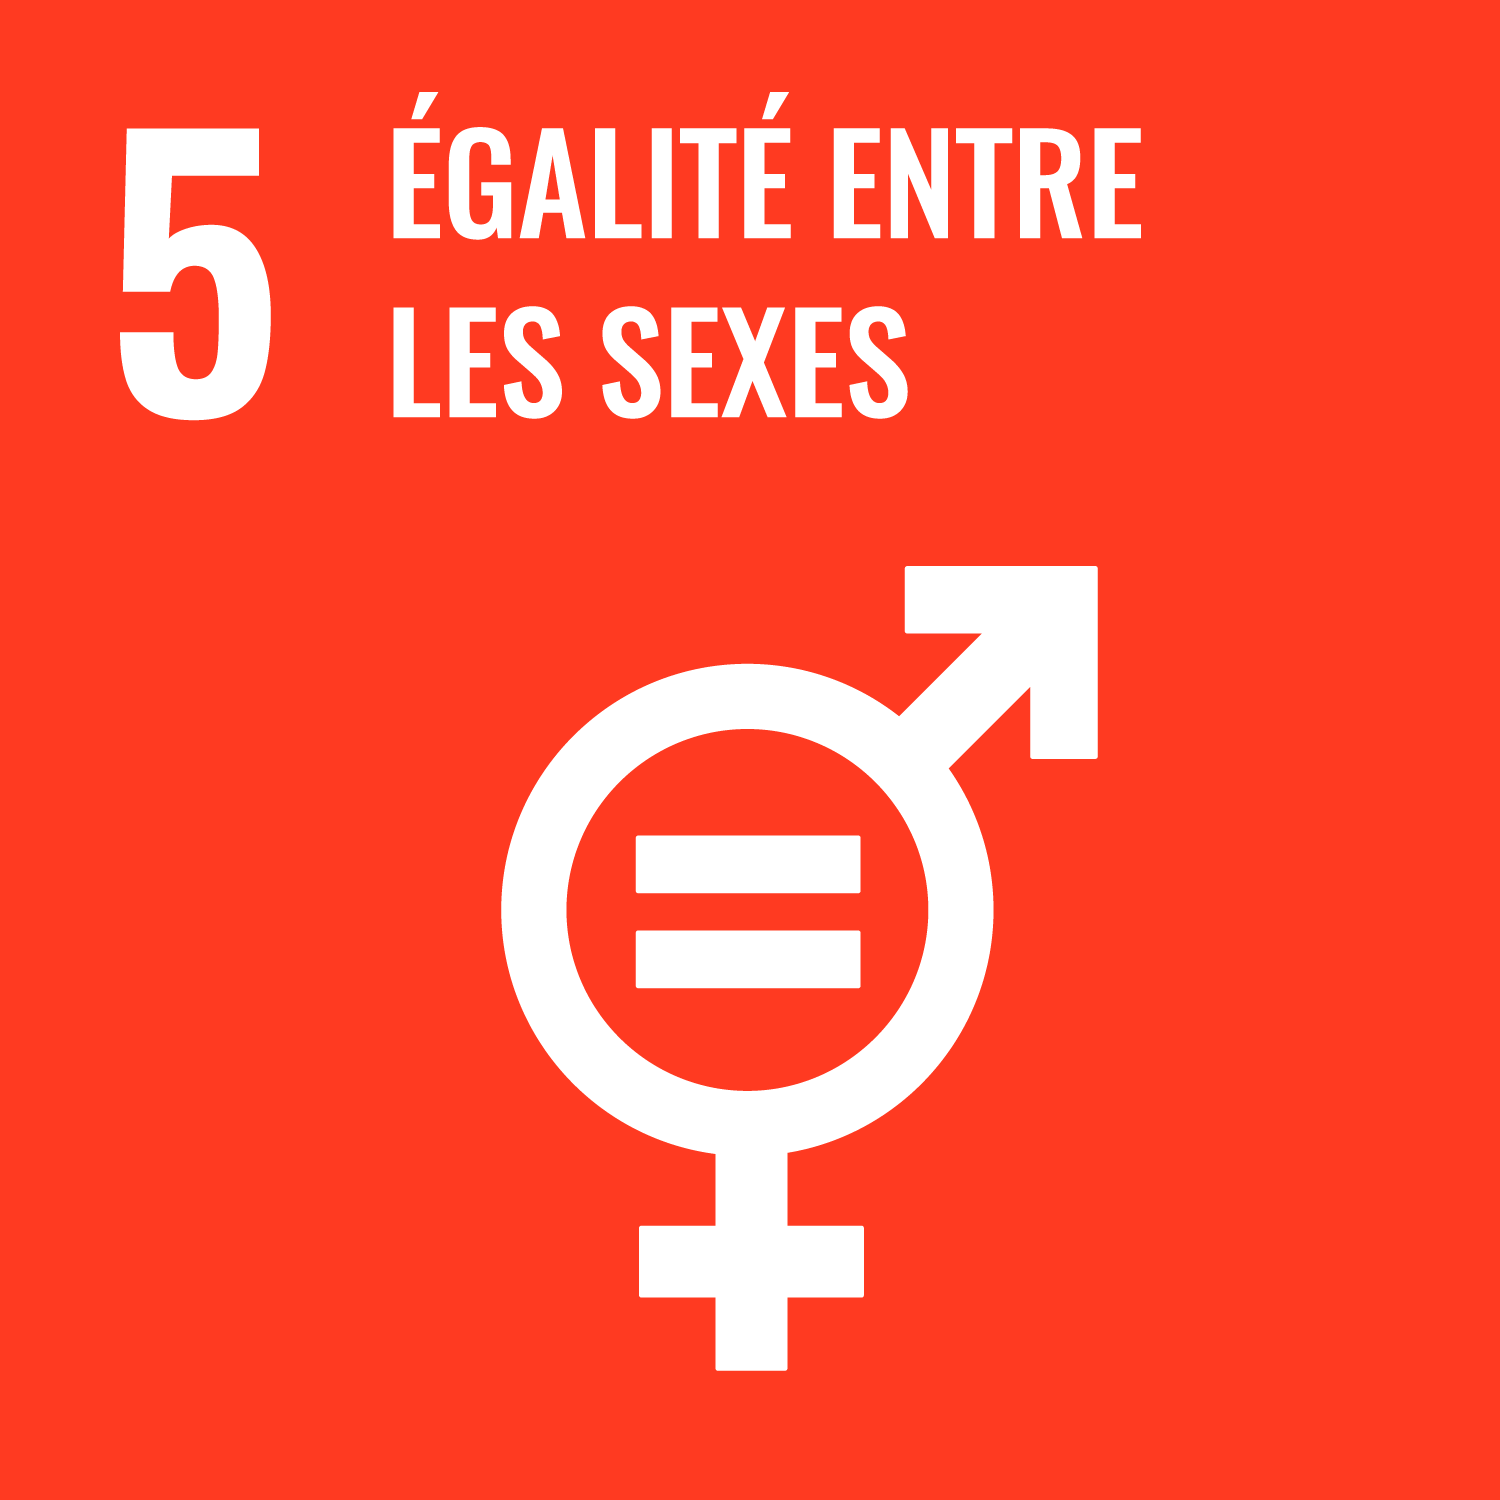 UN Compact Goal 5 Gender Equality